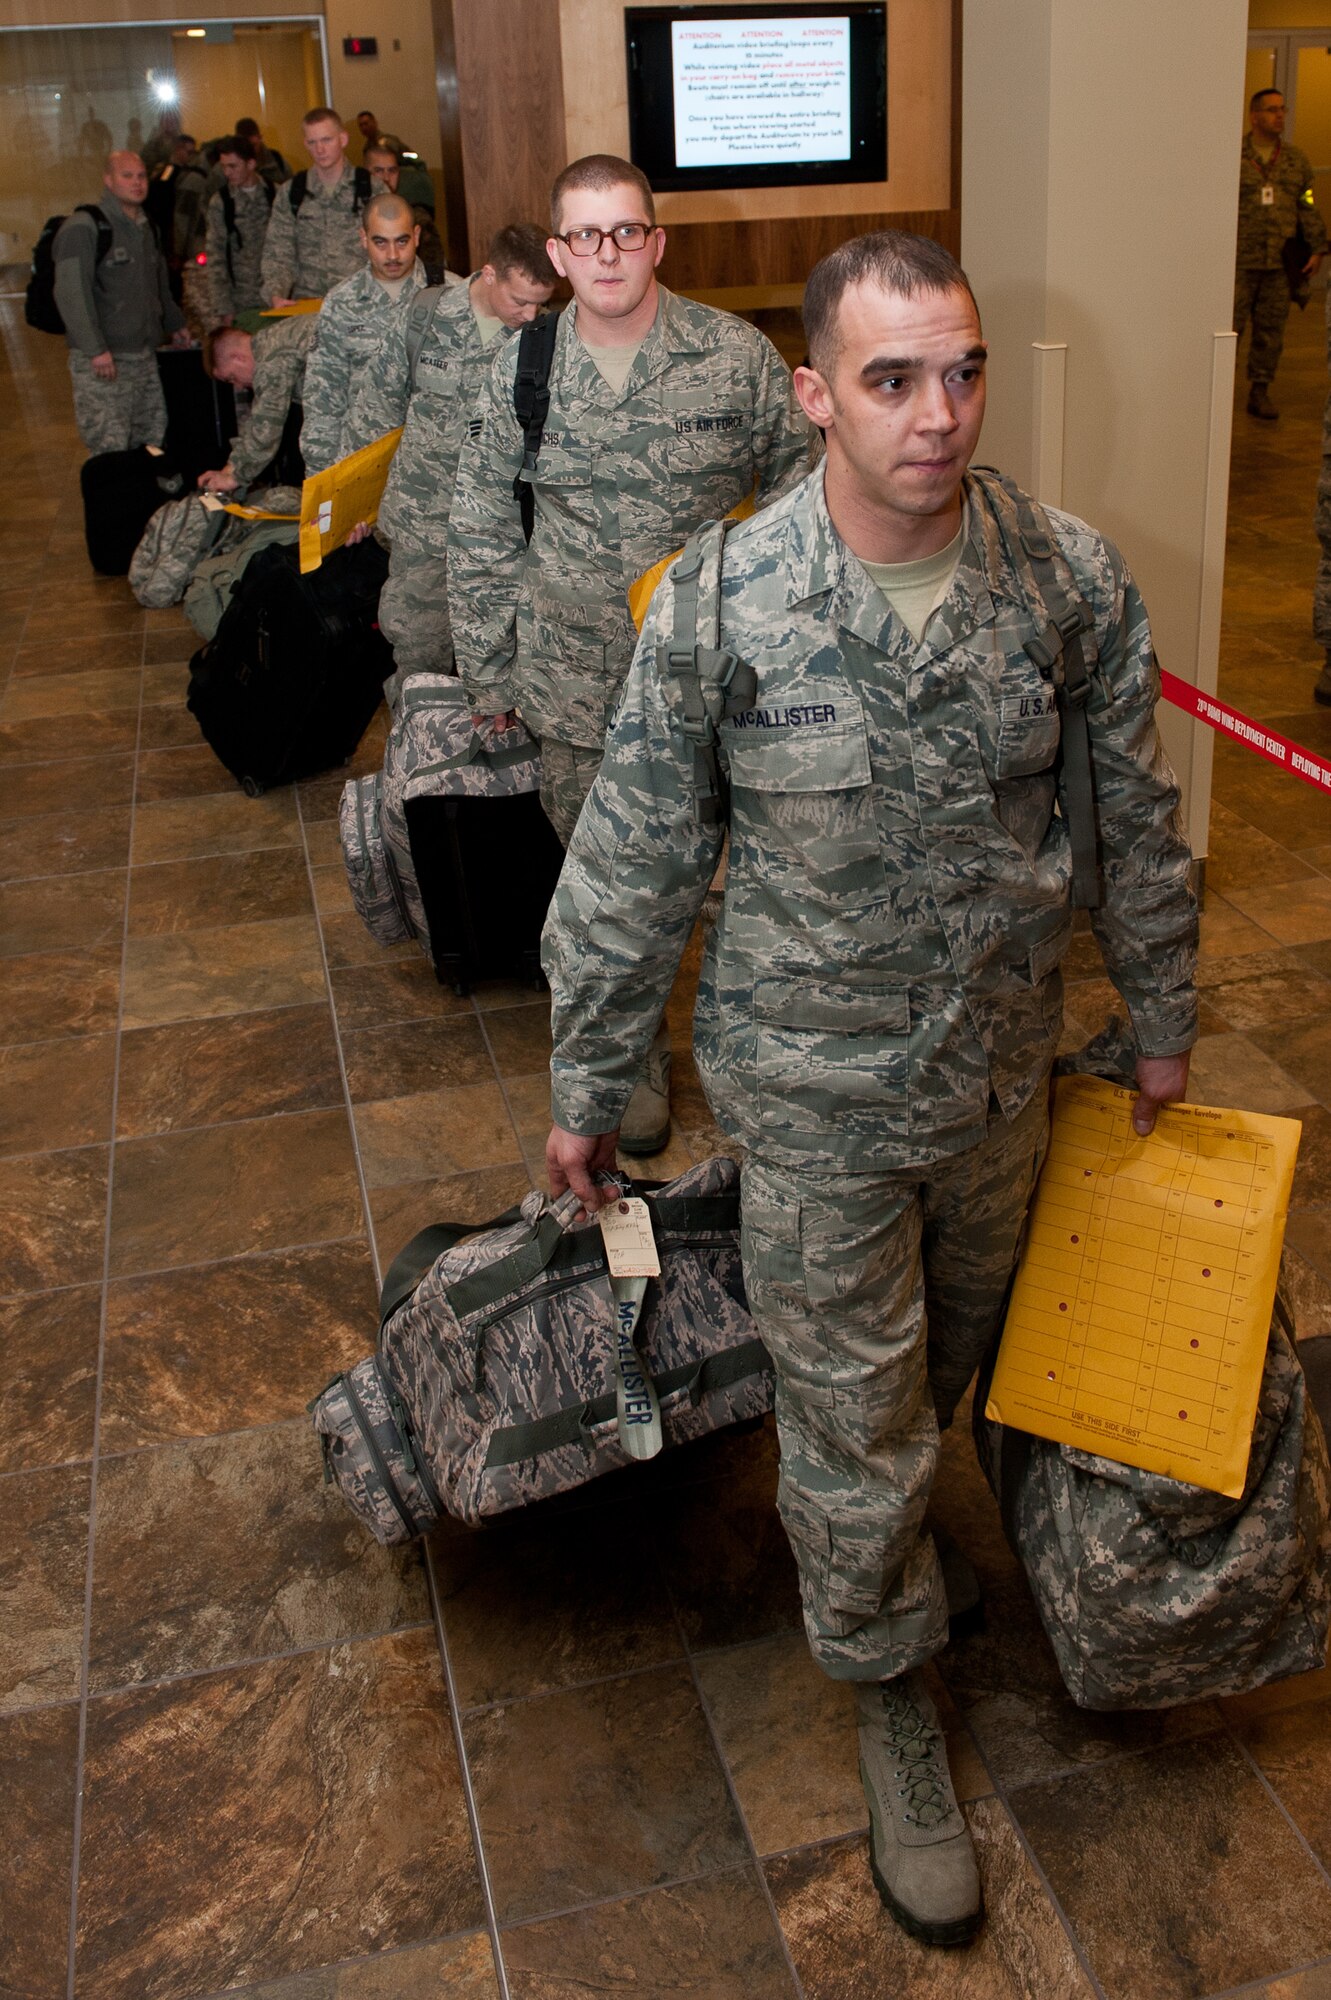 Airmen assigned to the 34th Bomb Squadron enter a deployment processing line at the Deployment Center on Ellsworth Air Force Base, S.D., Jan. 19, 2013. Approximately 350 Ellsworth Airmen are deploying to Southwest Asia to support missions in the U.S. Central Command area of responsibility. (U.S. Air Force photo by Airman 1st Class Kate Thornton-Maurer/ Released)